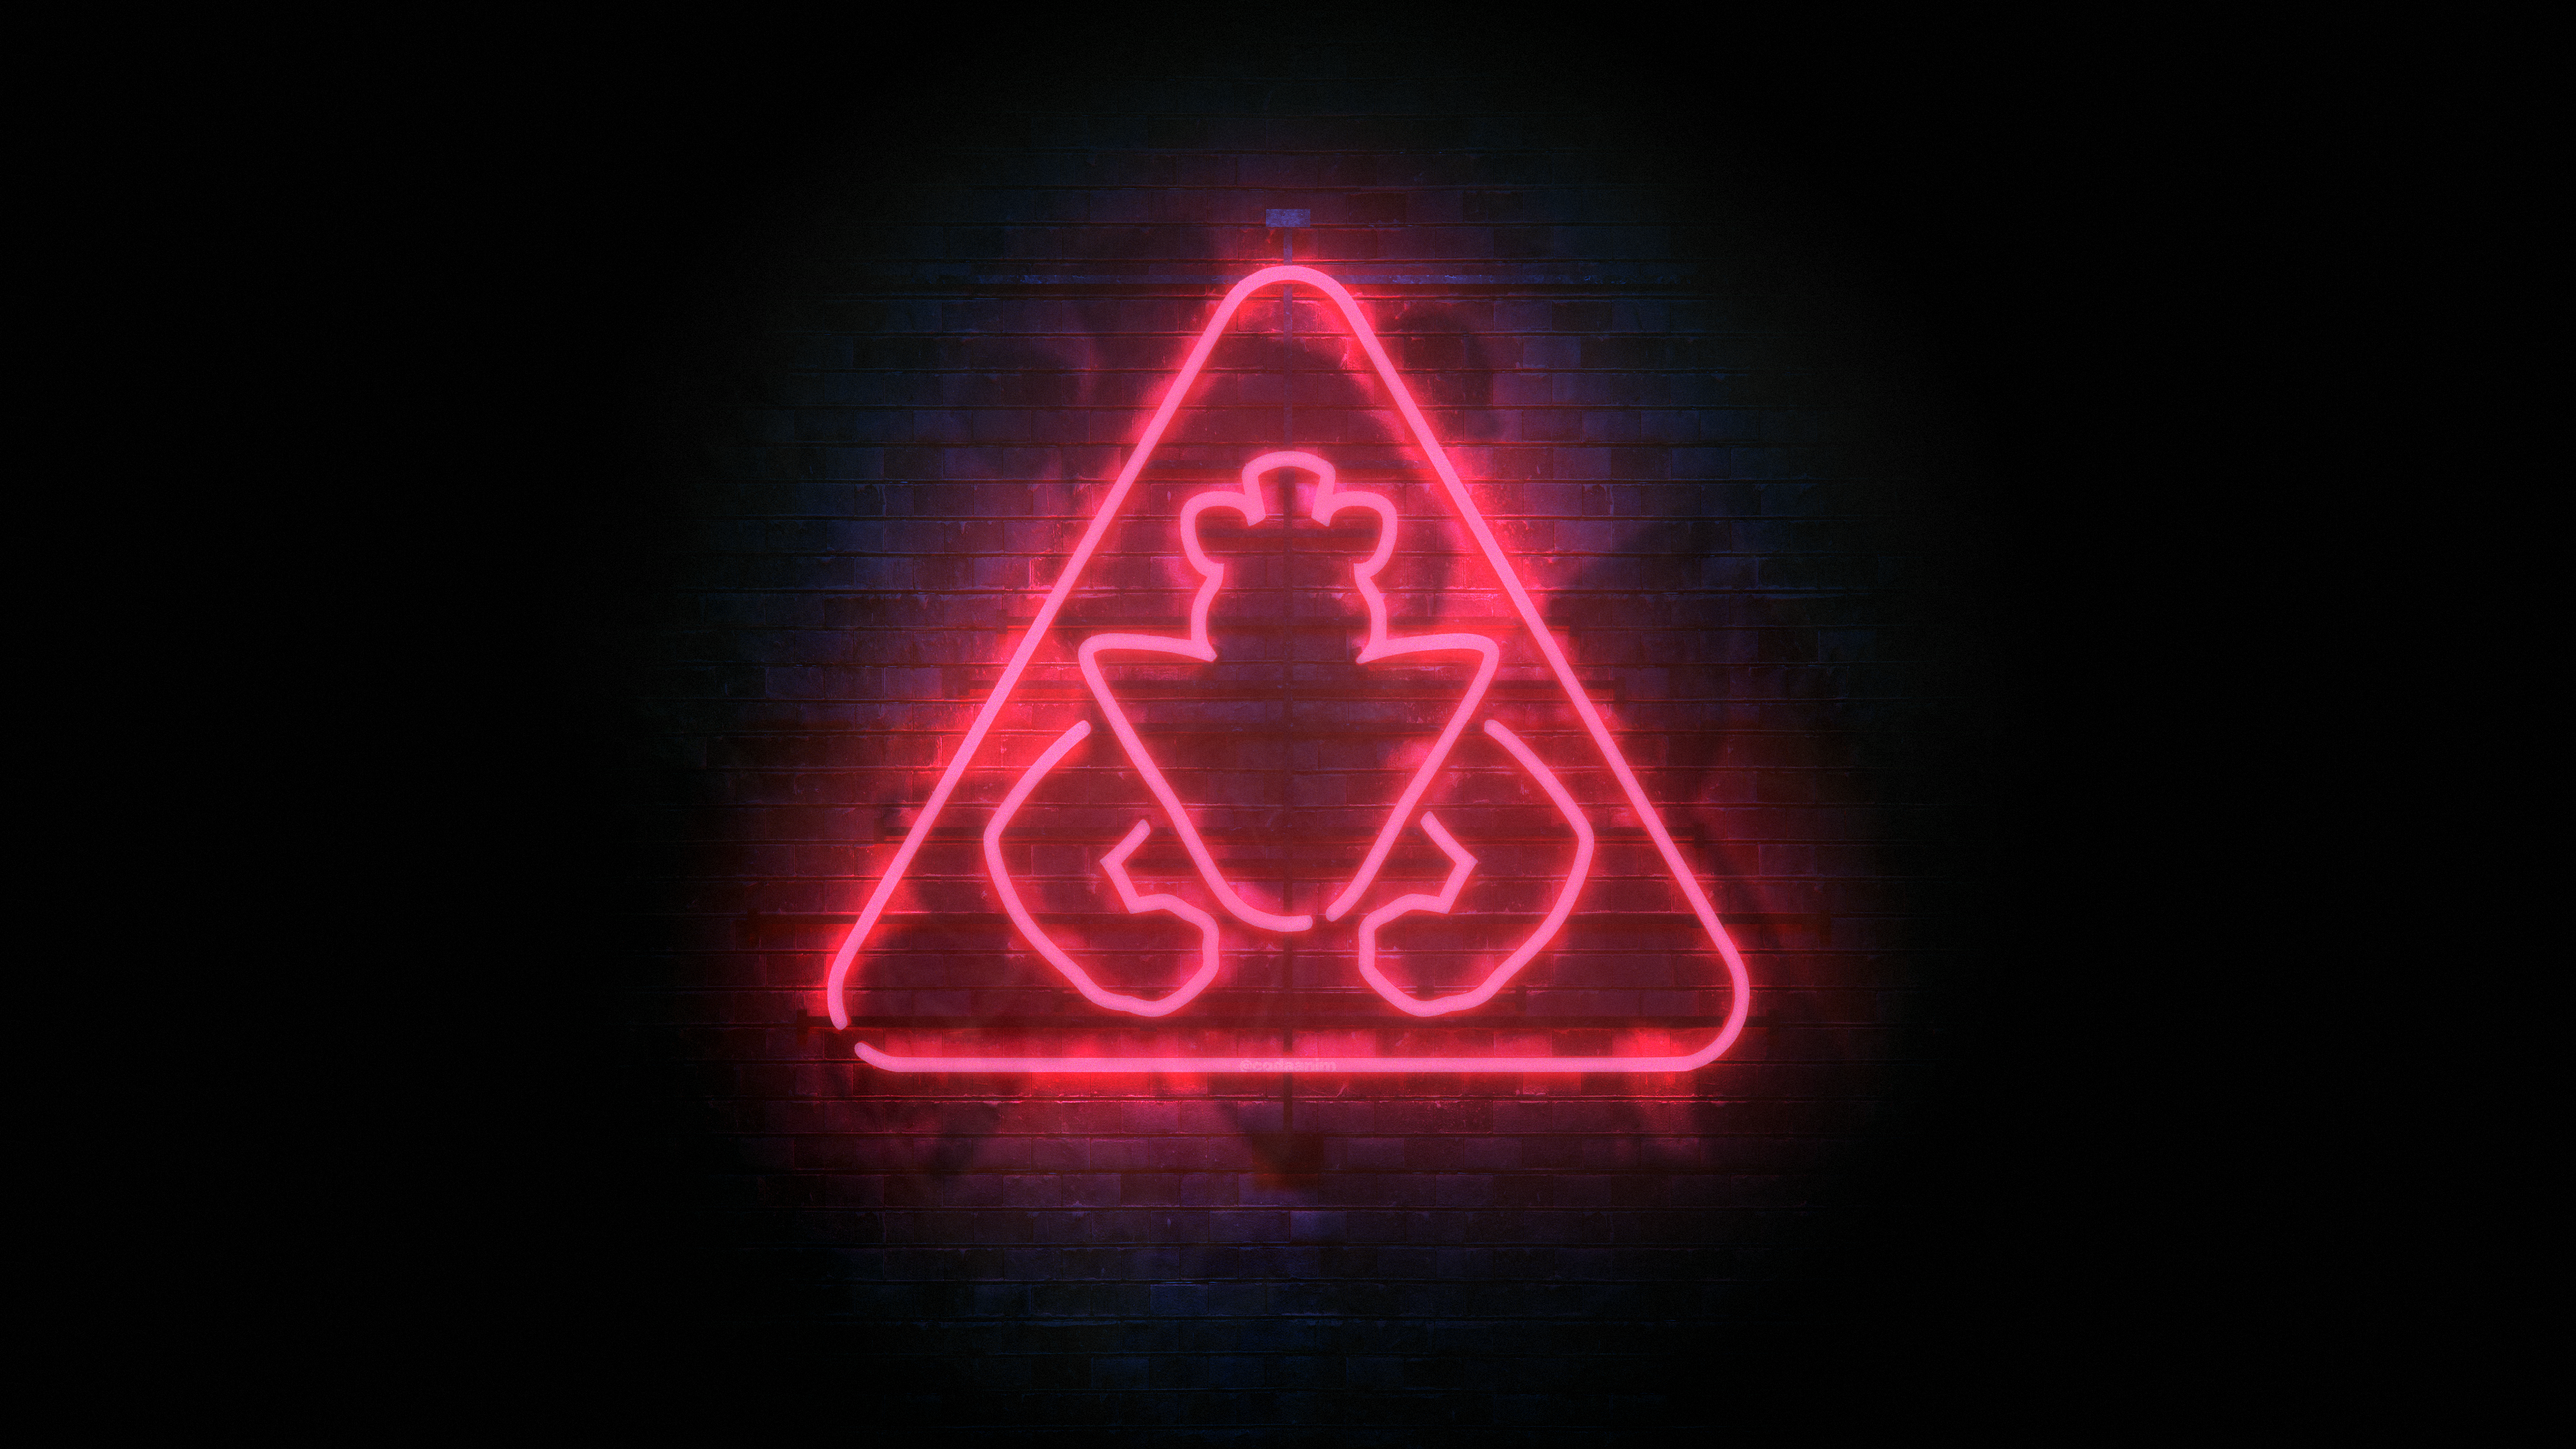 4K Security Breach Wallpapers I whipped up in Blender : r/fivenightsatfredd...